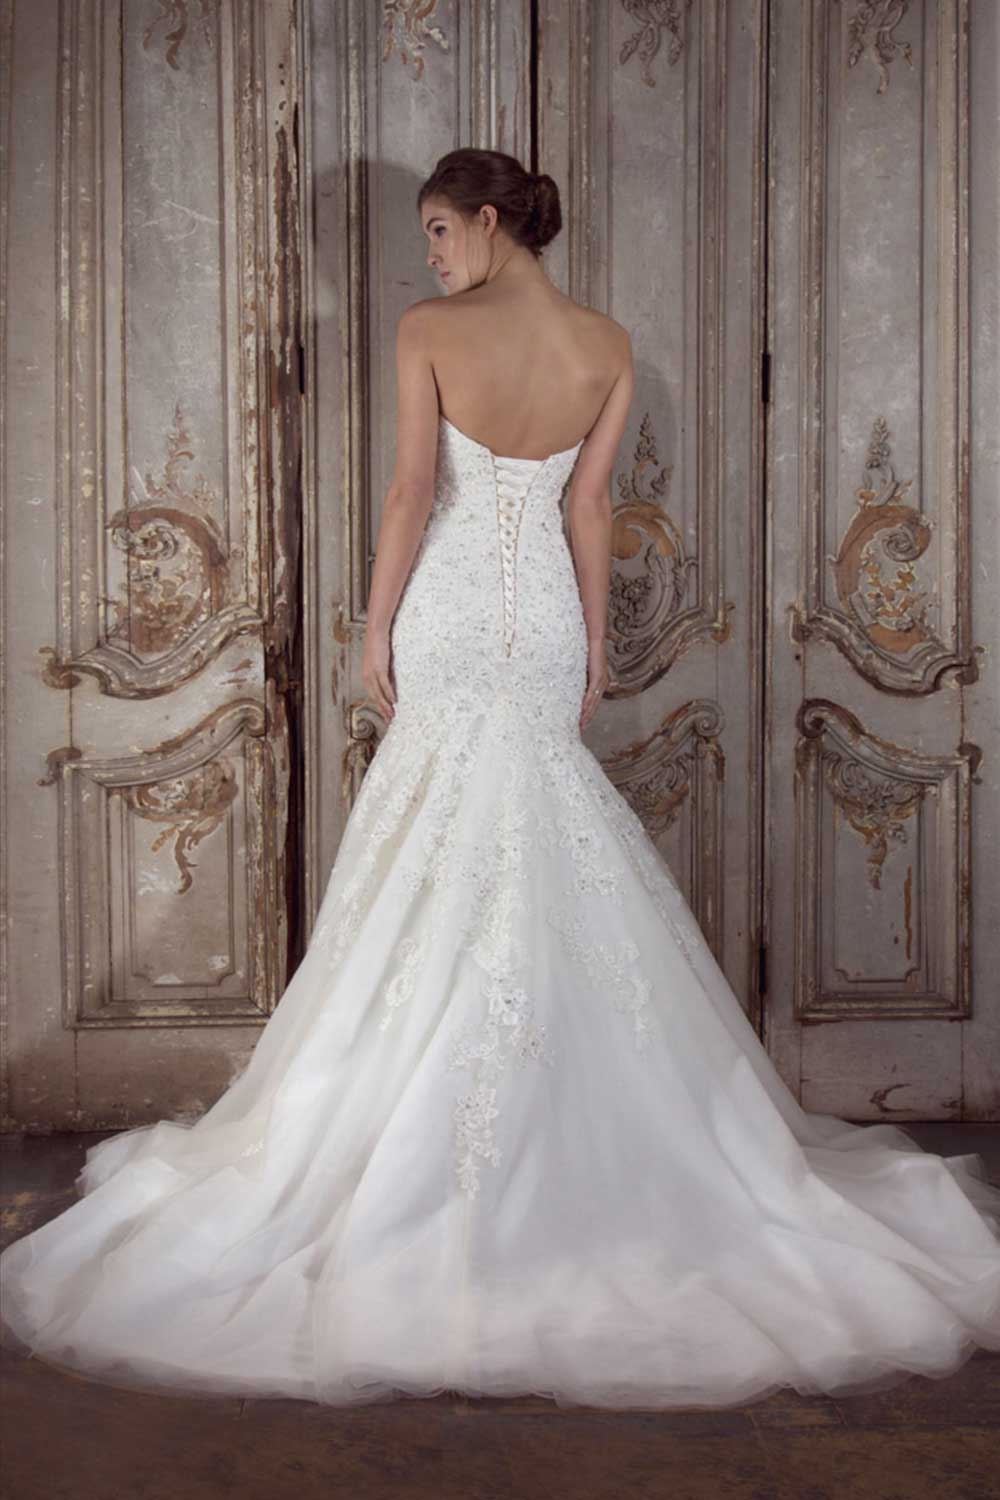 Fishtail wedding dress with crystals